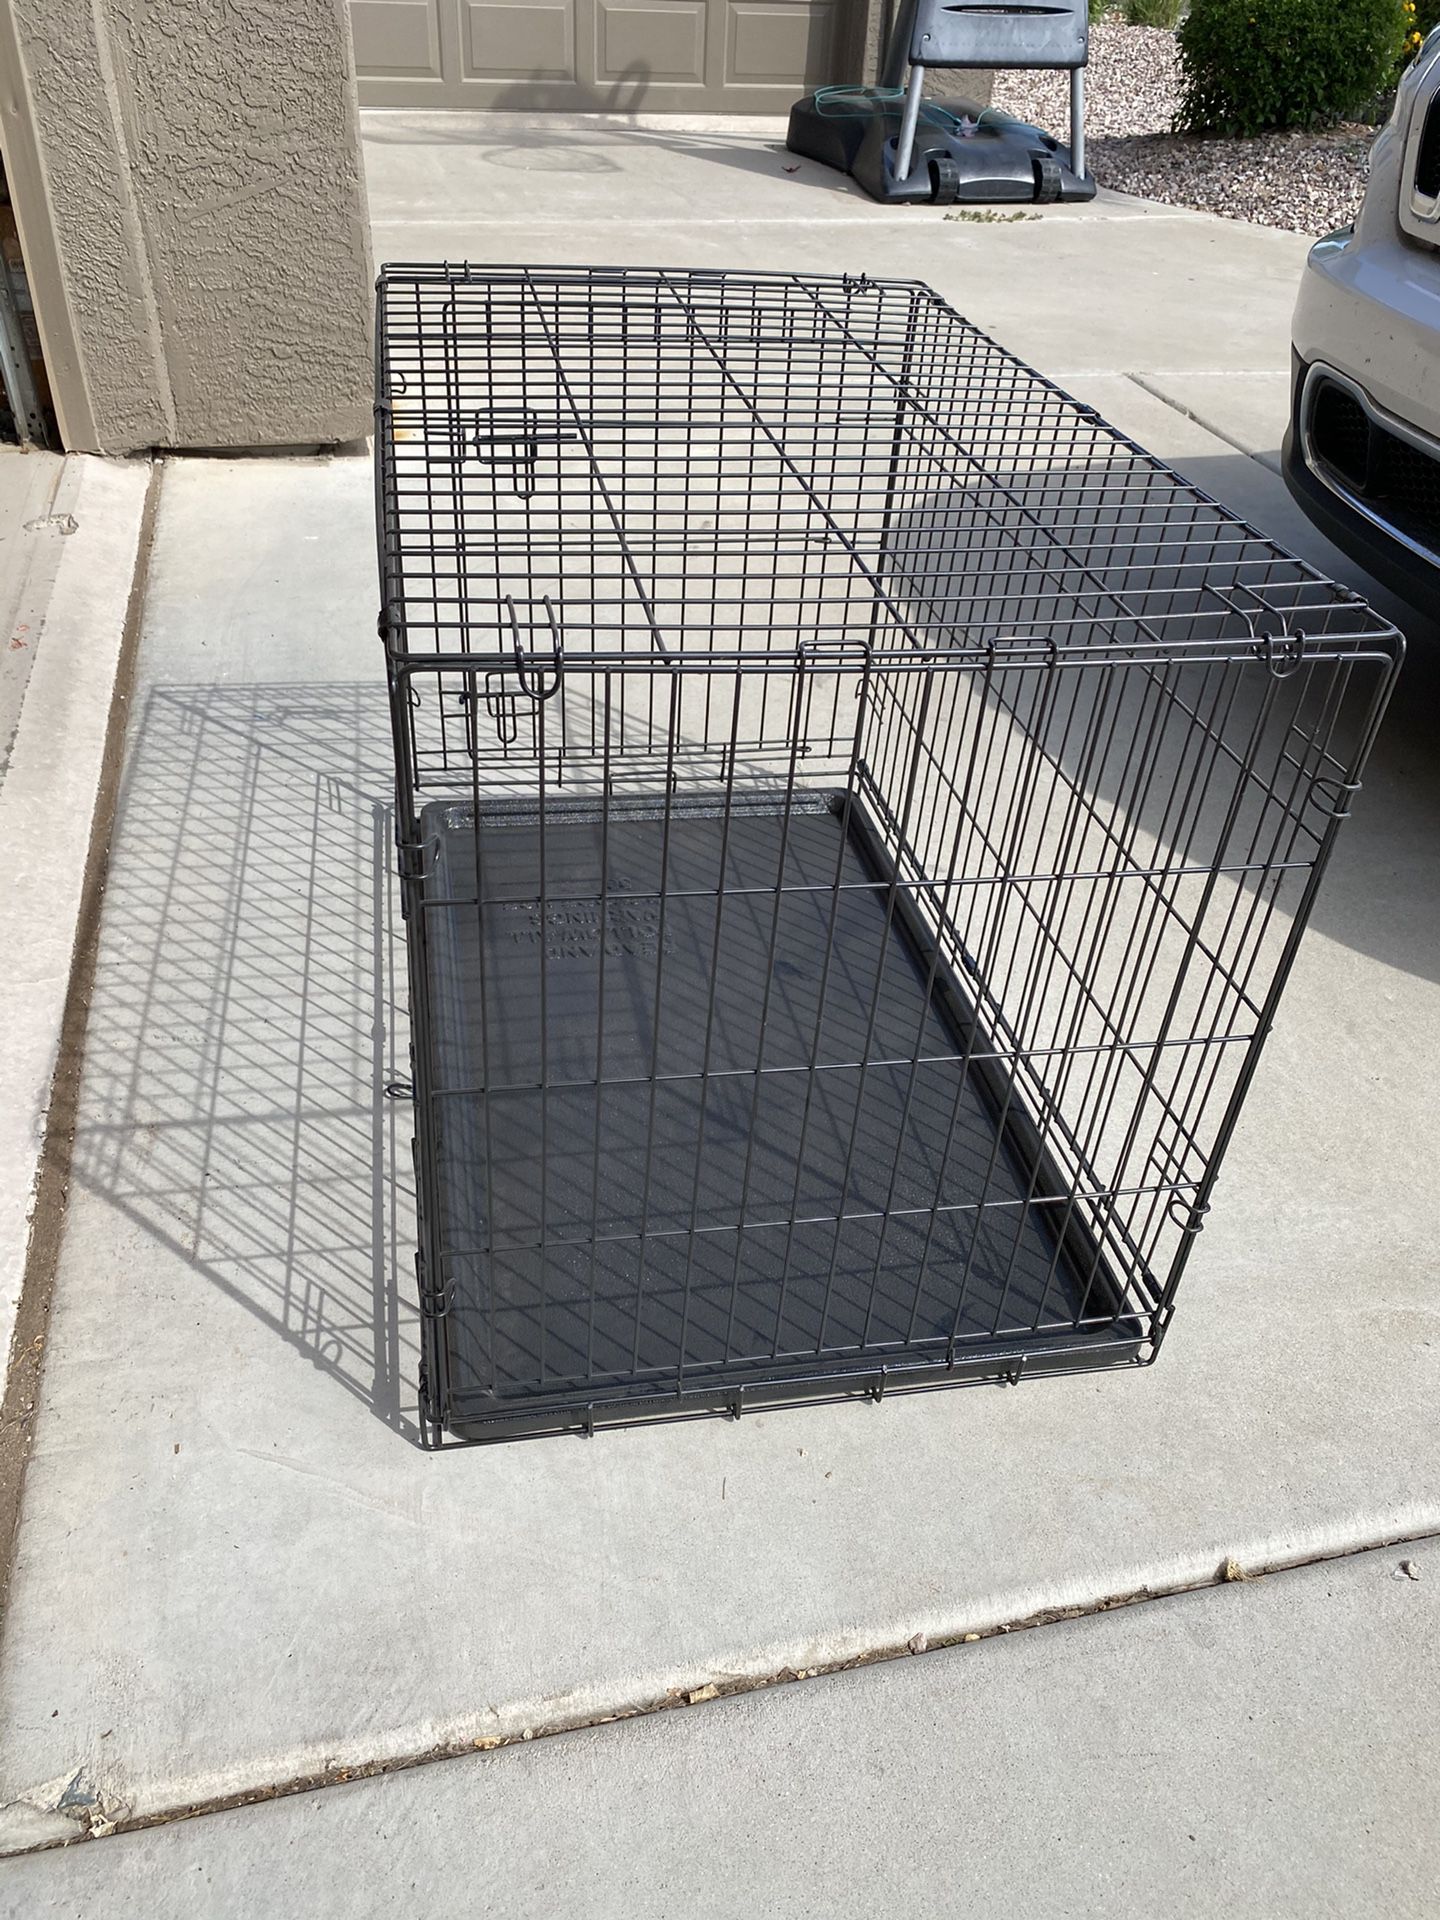 Dog crate 24” tall x 36” long x 22” wide